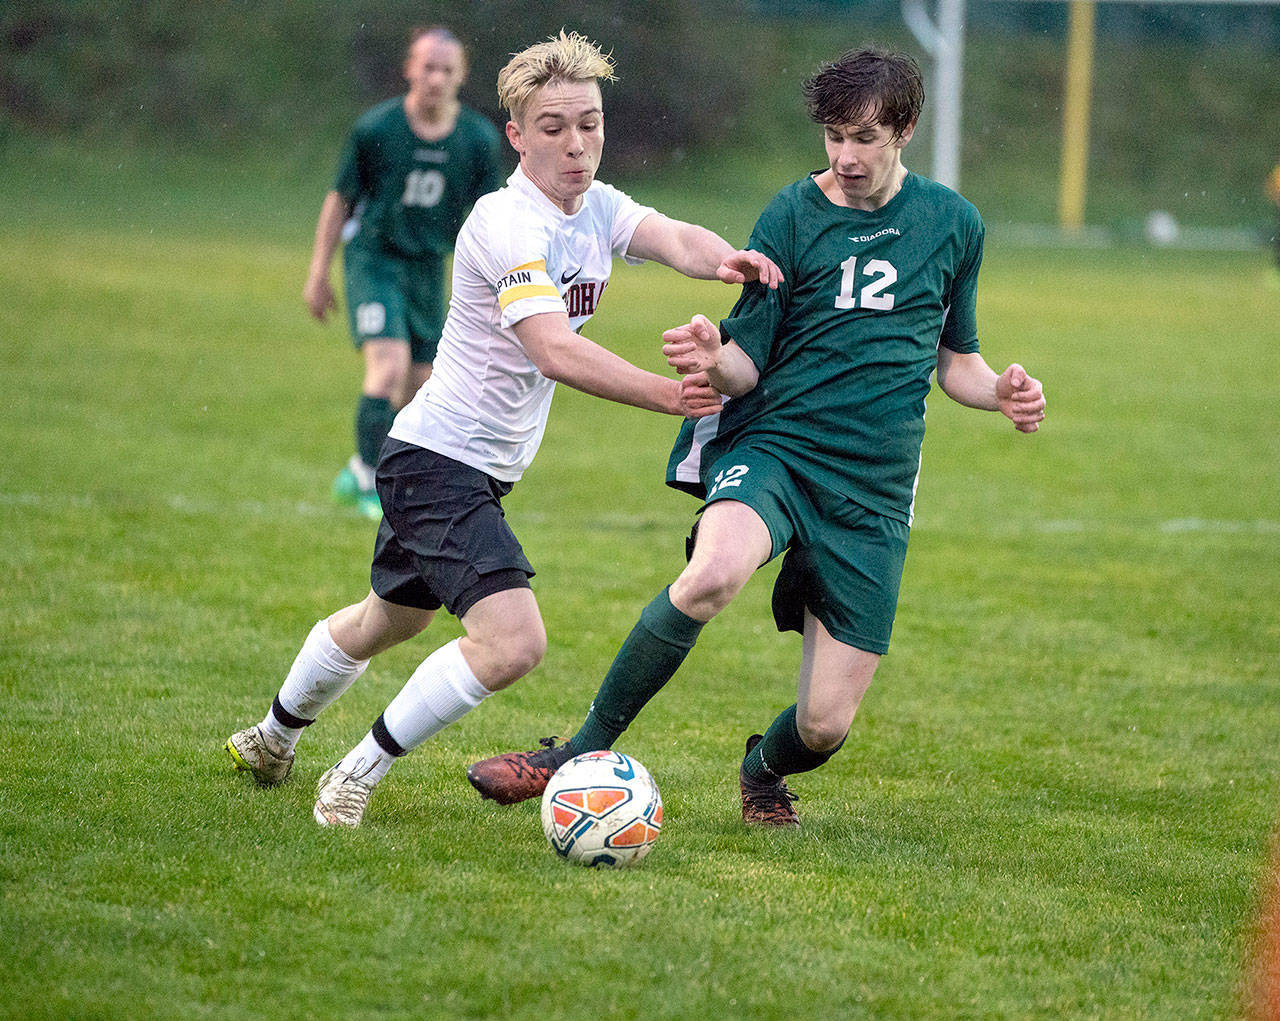 Port Angeles’ Andrew Methner, (12) and Redhawk Ian Kjeldgaard battle for the ball during a rainy match Tuesday at Memorial Field in Port Townsend.